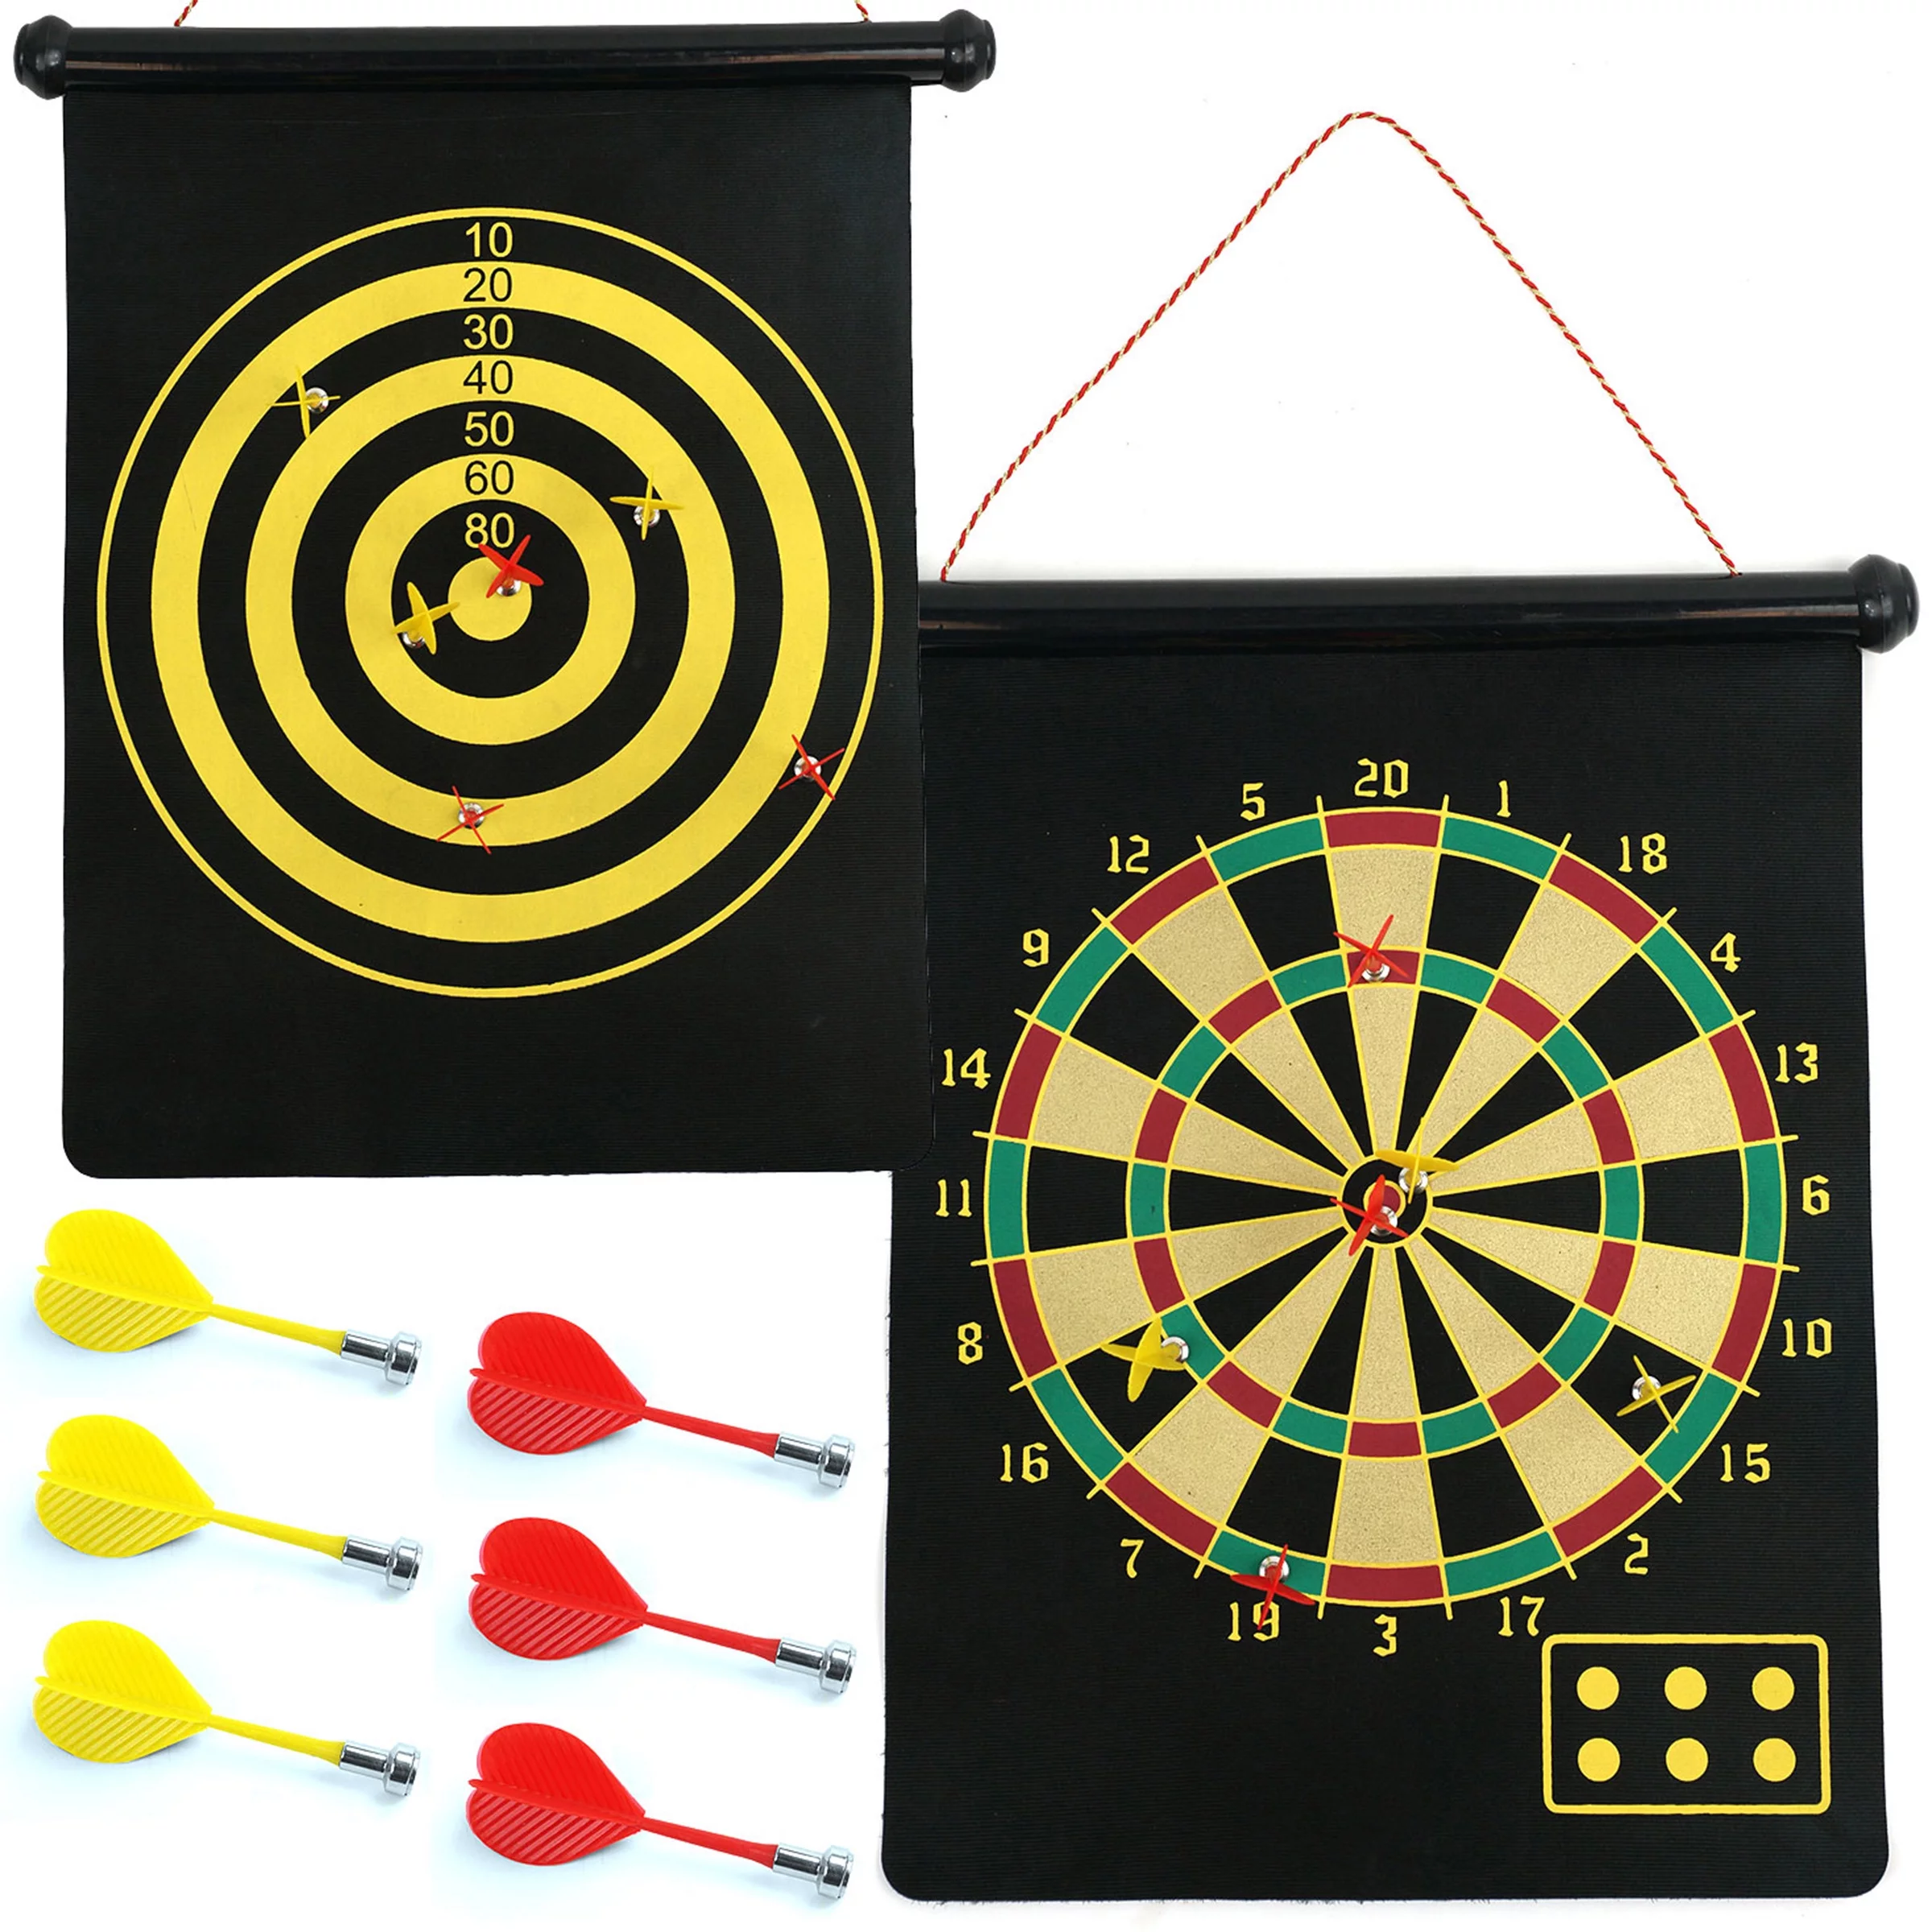 Magnetic Dart Board – Hanging Reversible Dartboard and Bullseye Game with 6 Magnetic Darts – Rolls Up for Convenient Storage by Trademark Games